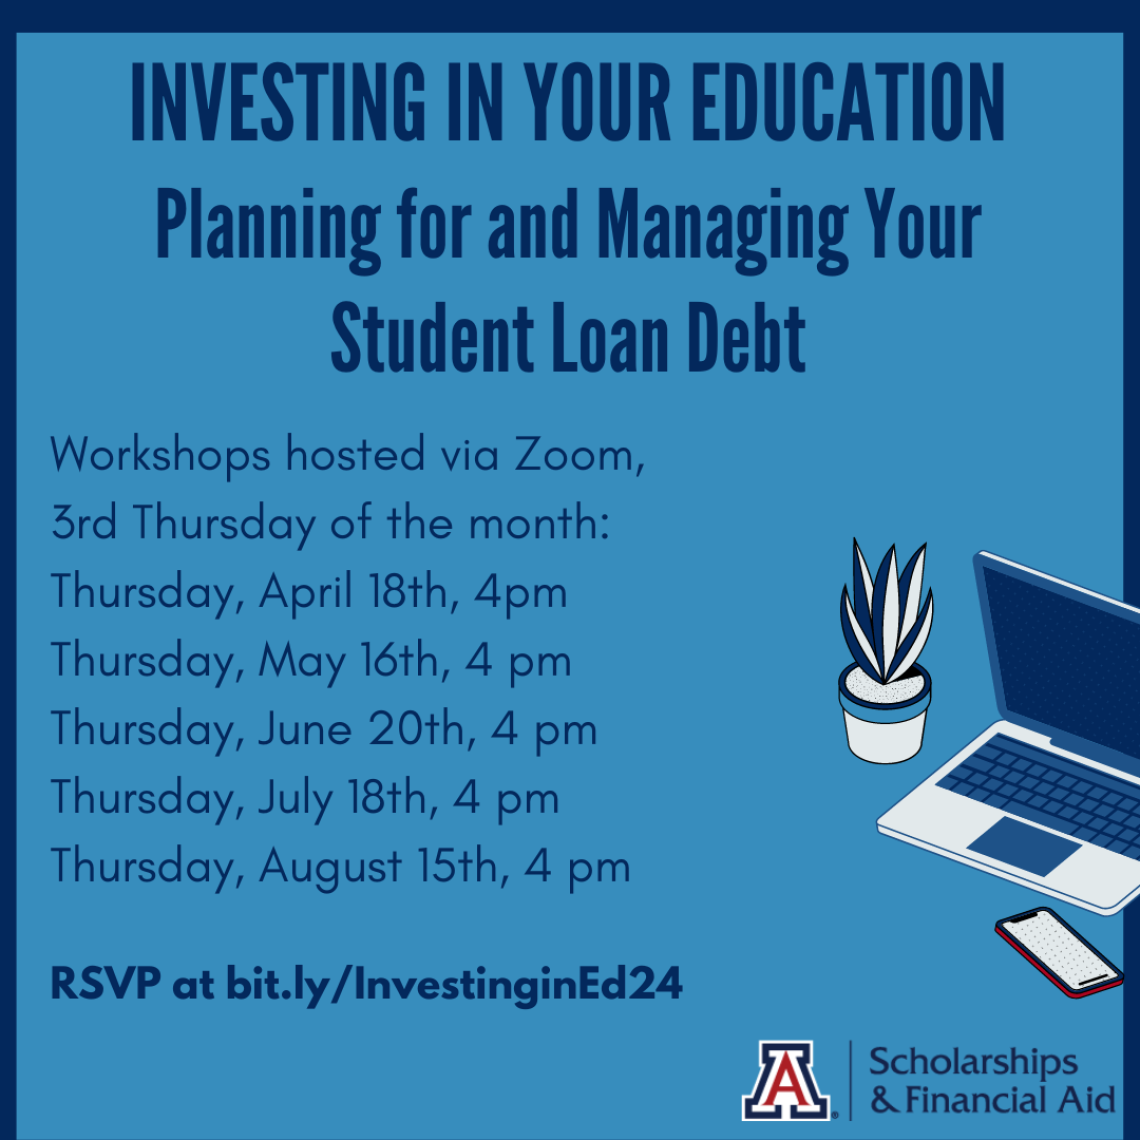 Investing in Your Education Workshop